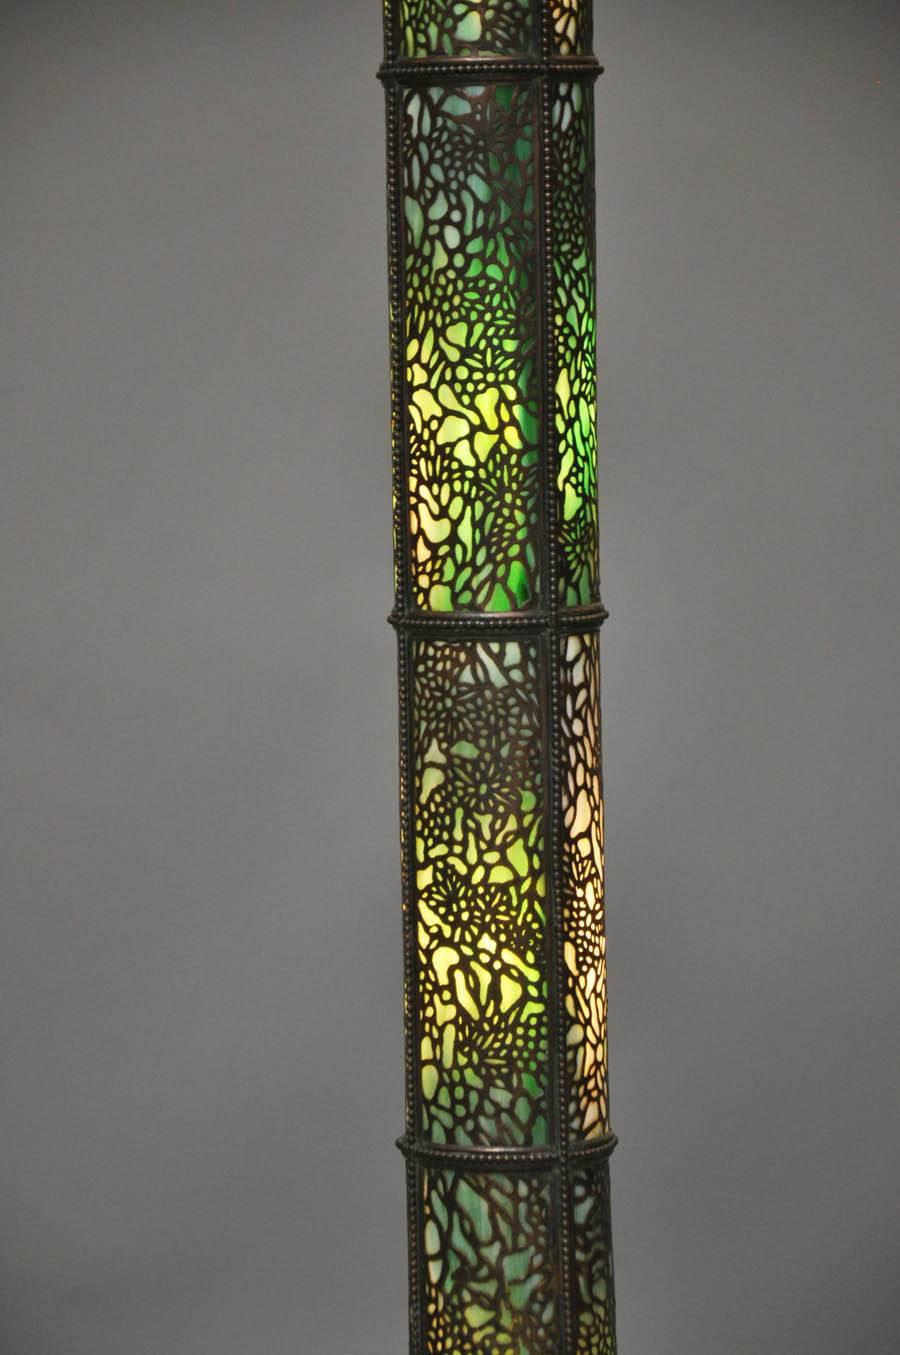 stained glass floor lamps